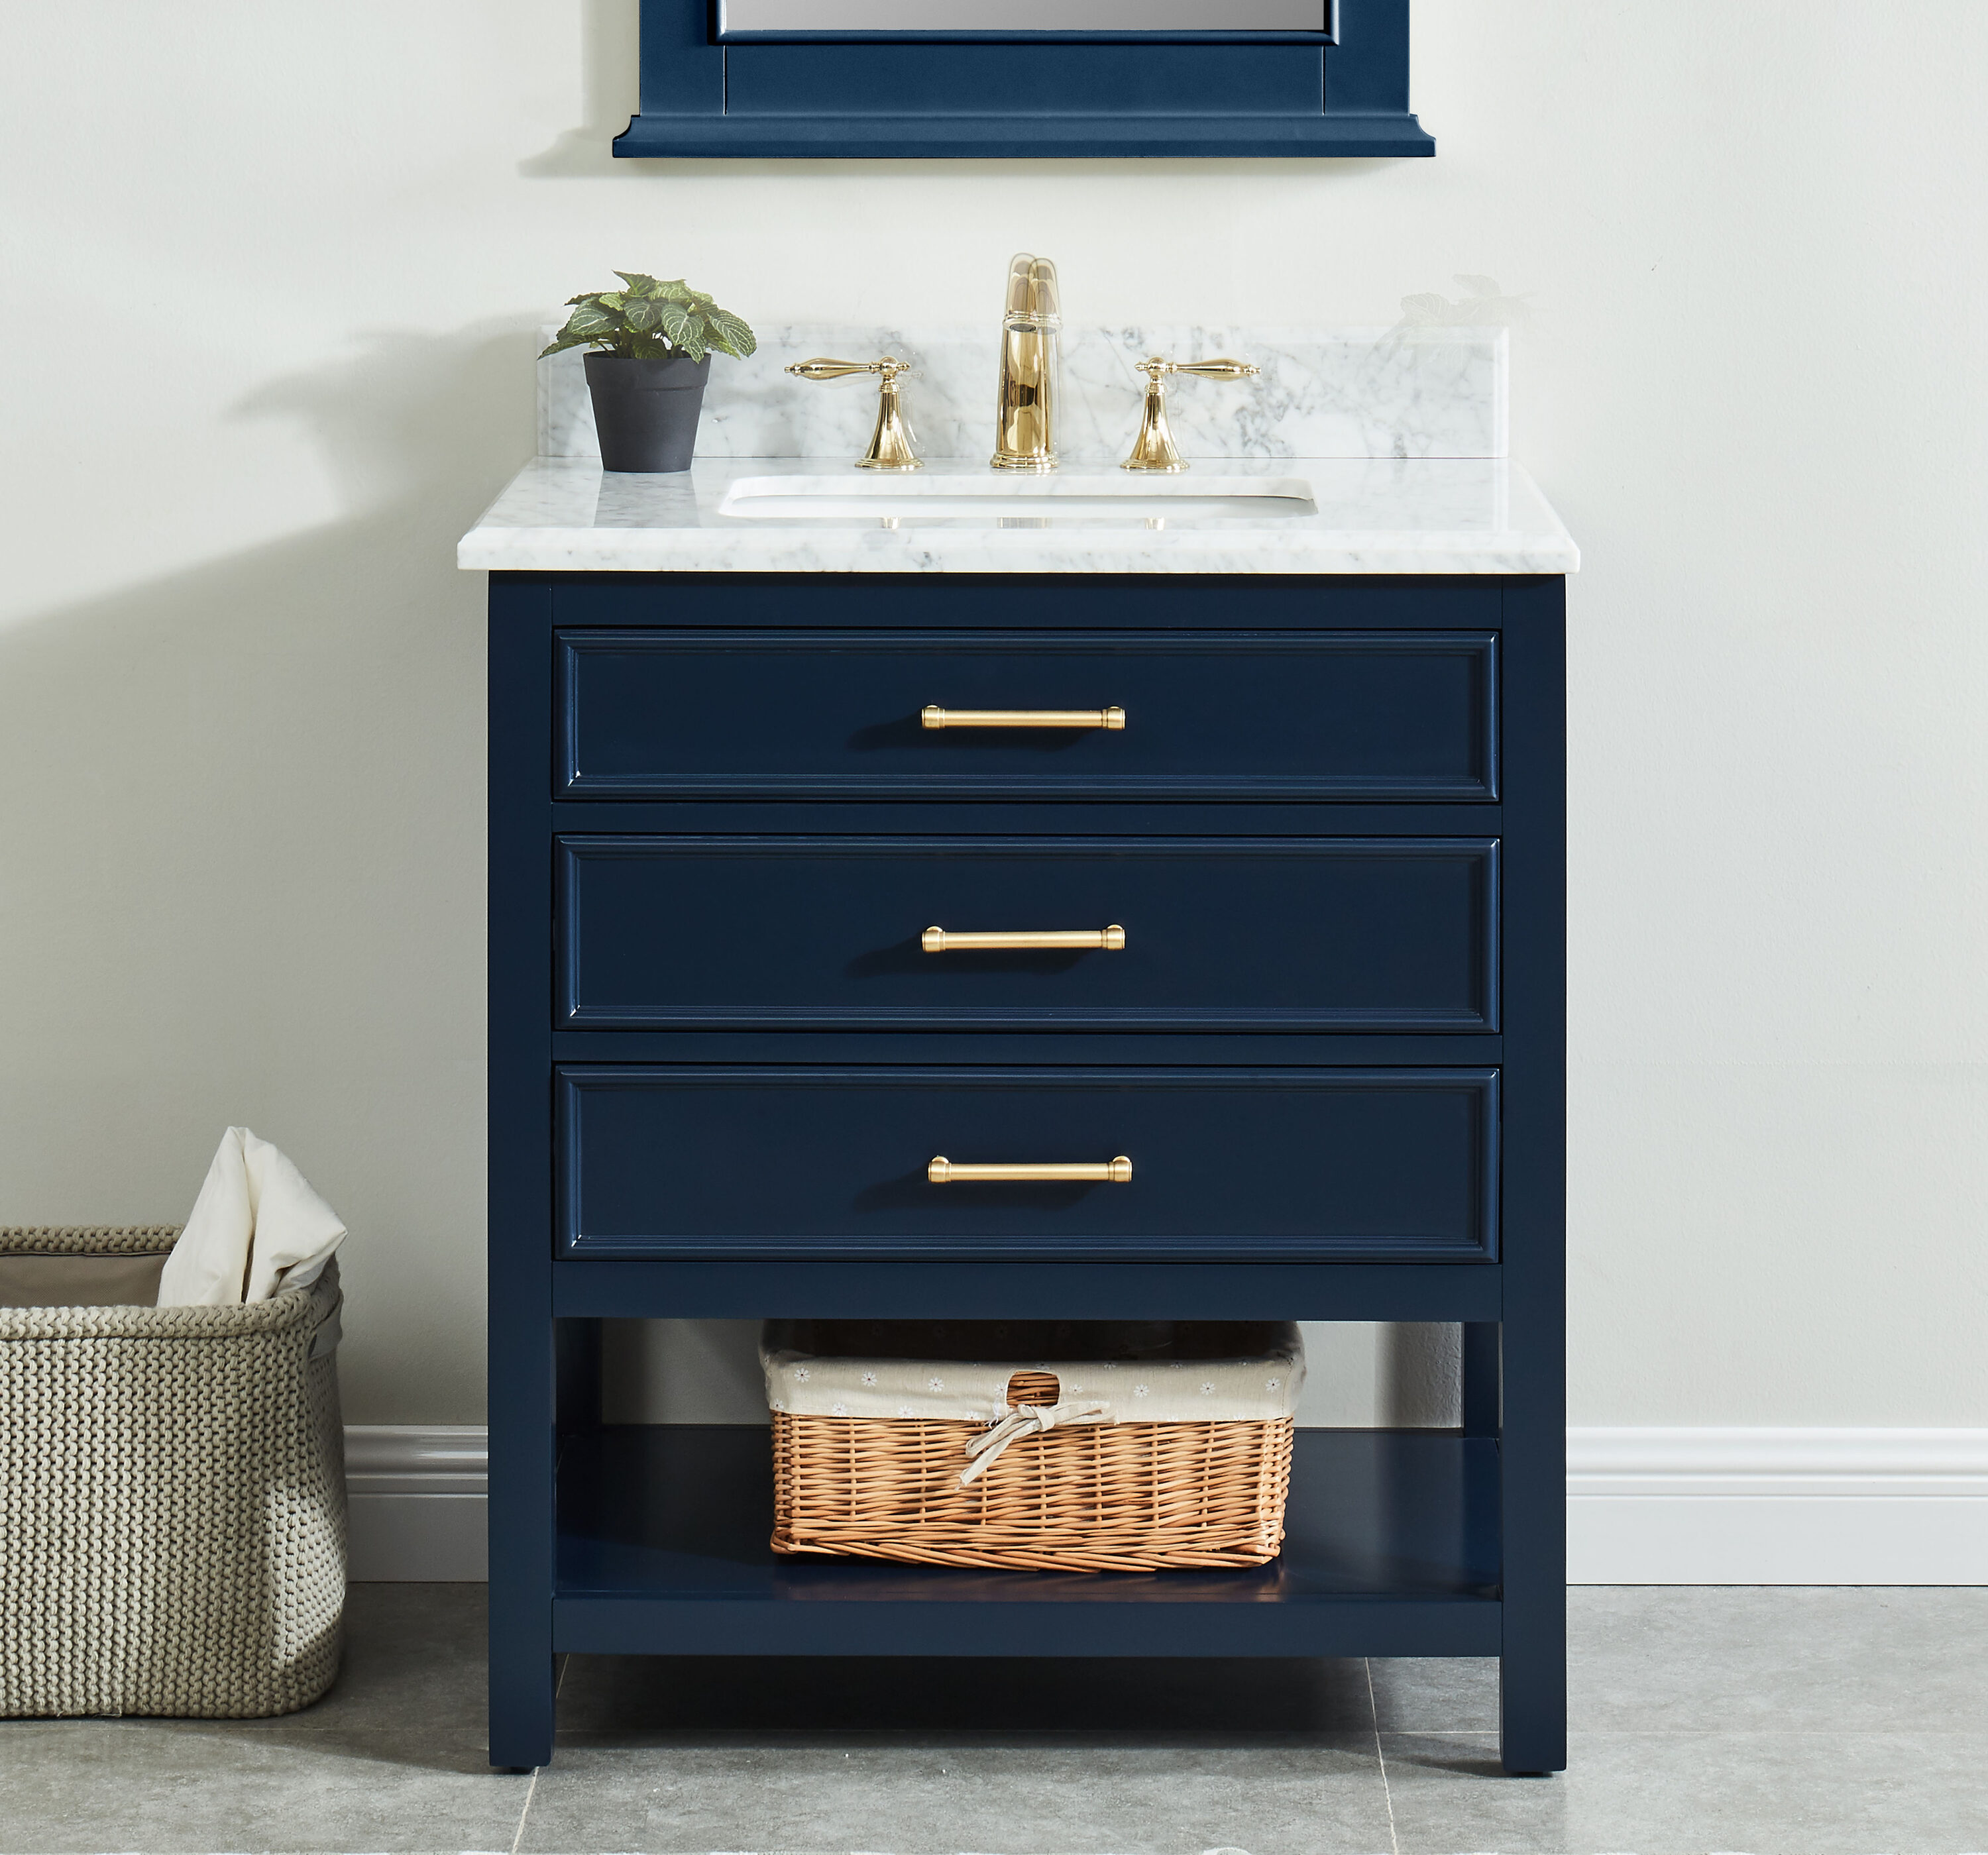 3 x 3 Reclaimed Locker Basket Unit with Royal Blue Drawers and Natural  Steel Frame, Free U.S. Shipping